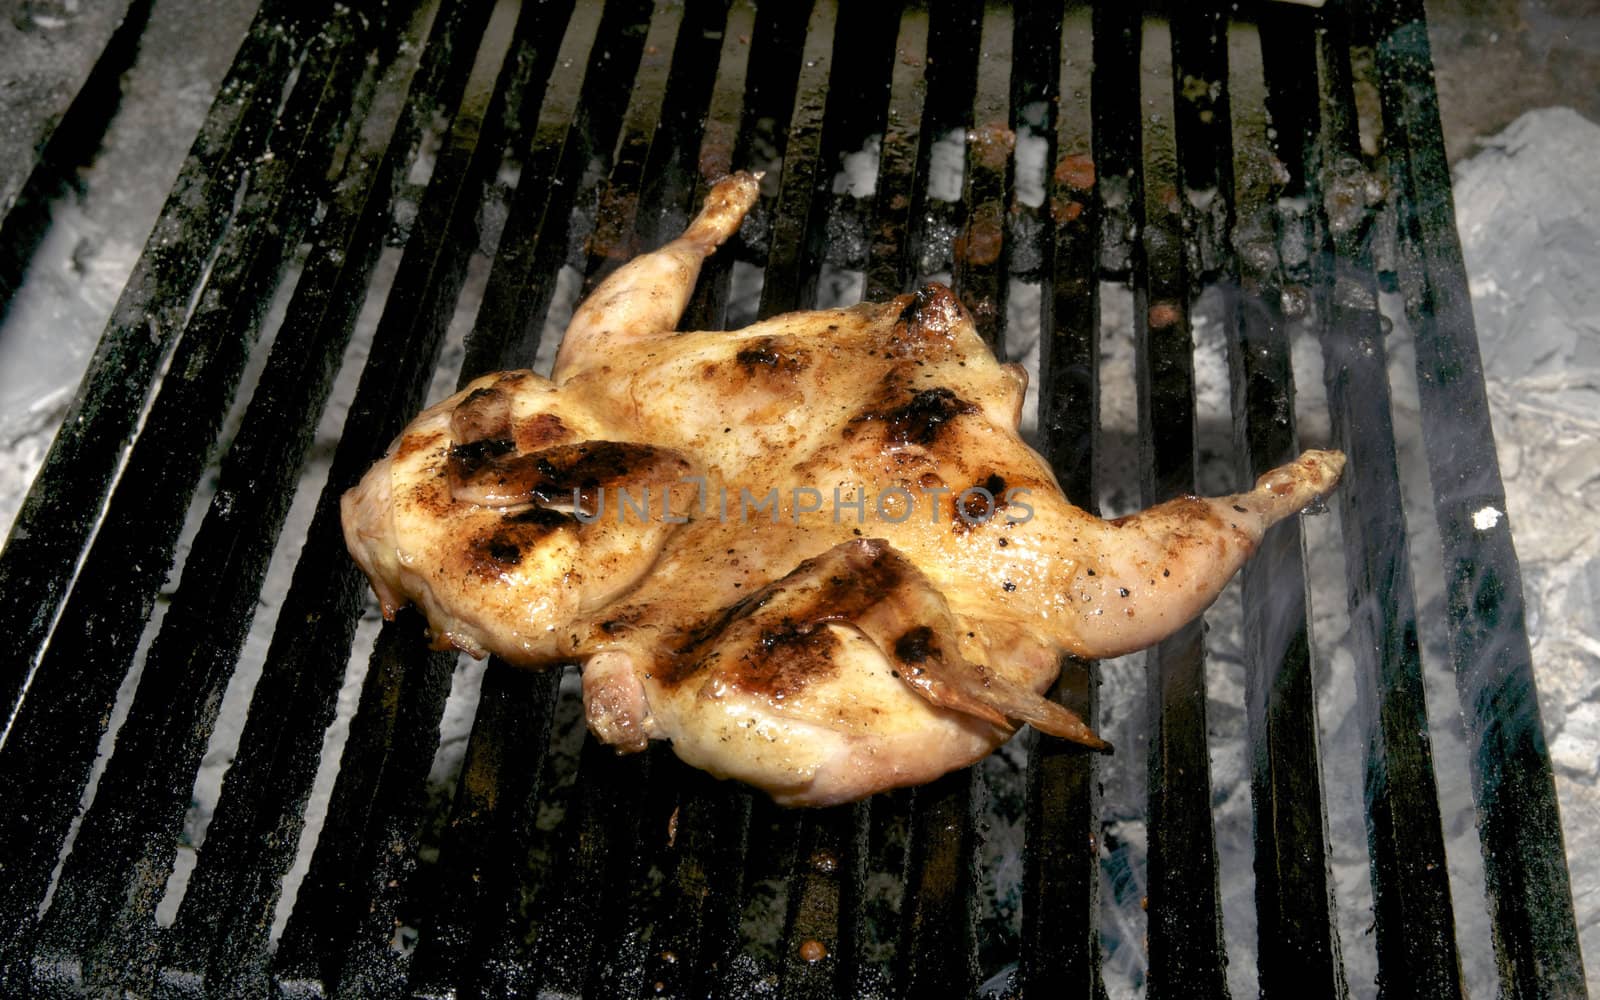 grilling quail by Lester120